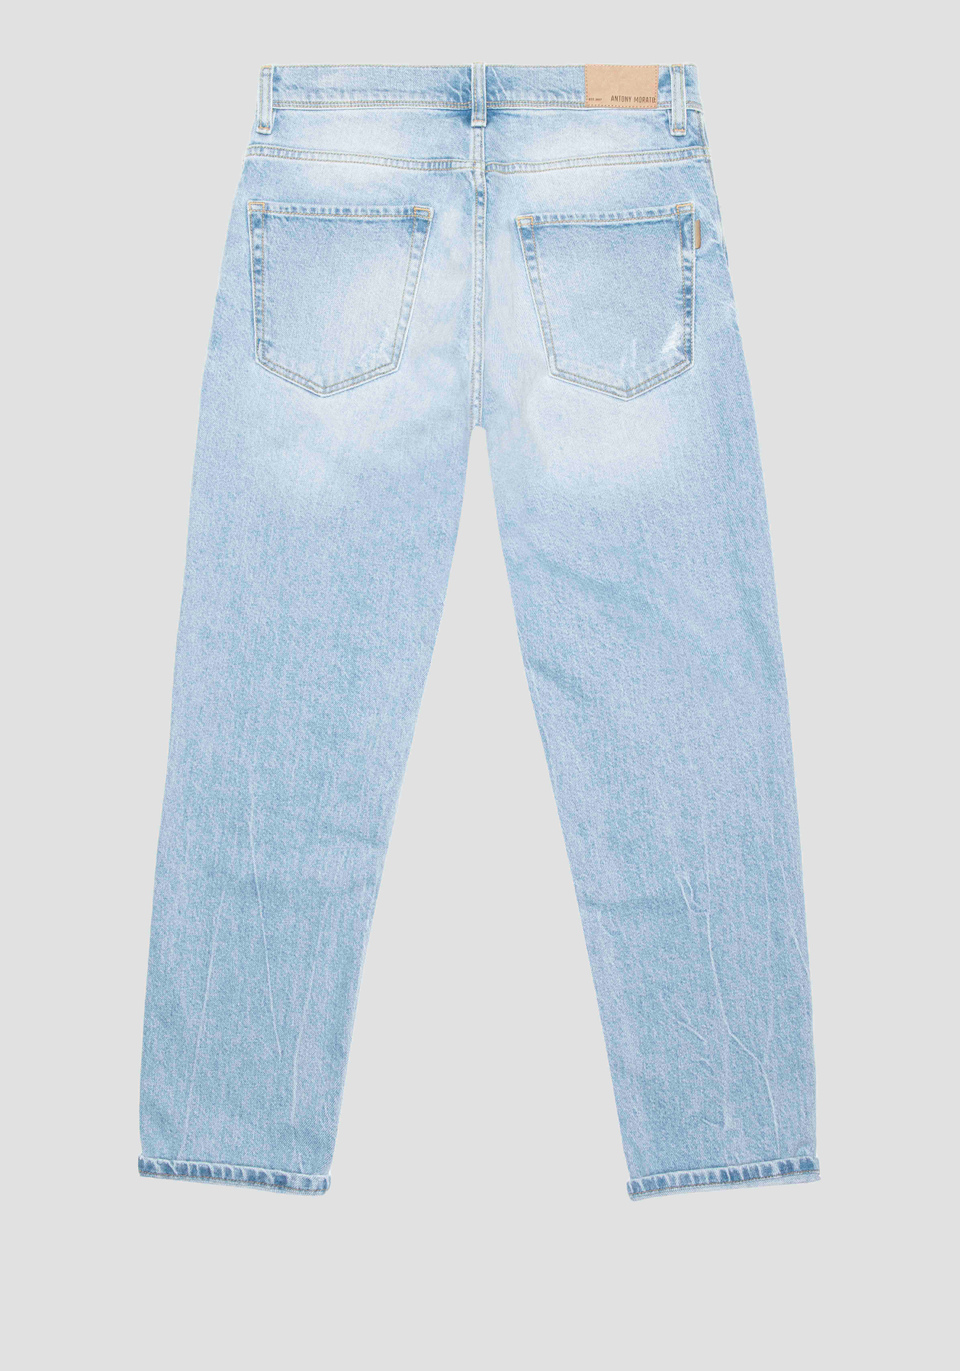 "ARGON" SLIM ANKLE LENGTH FIT JEANS IN BLUE COMFORT DENIM WITH AN AUTHENTIC LOOK - Antony Morato Online Shop